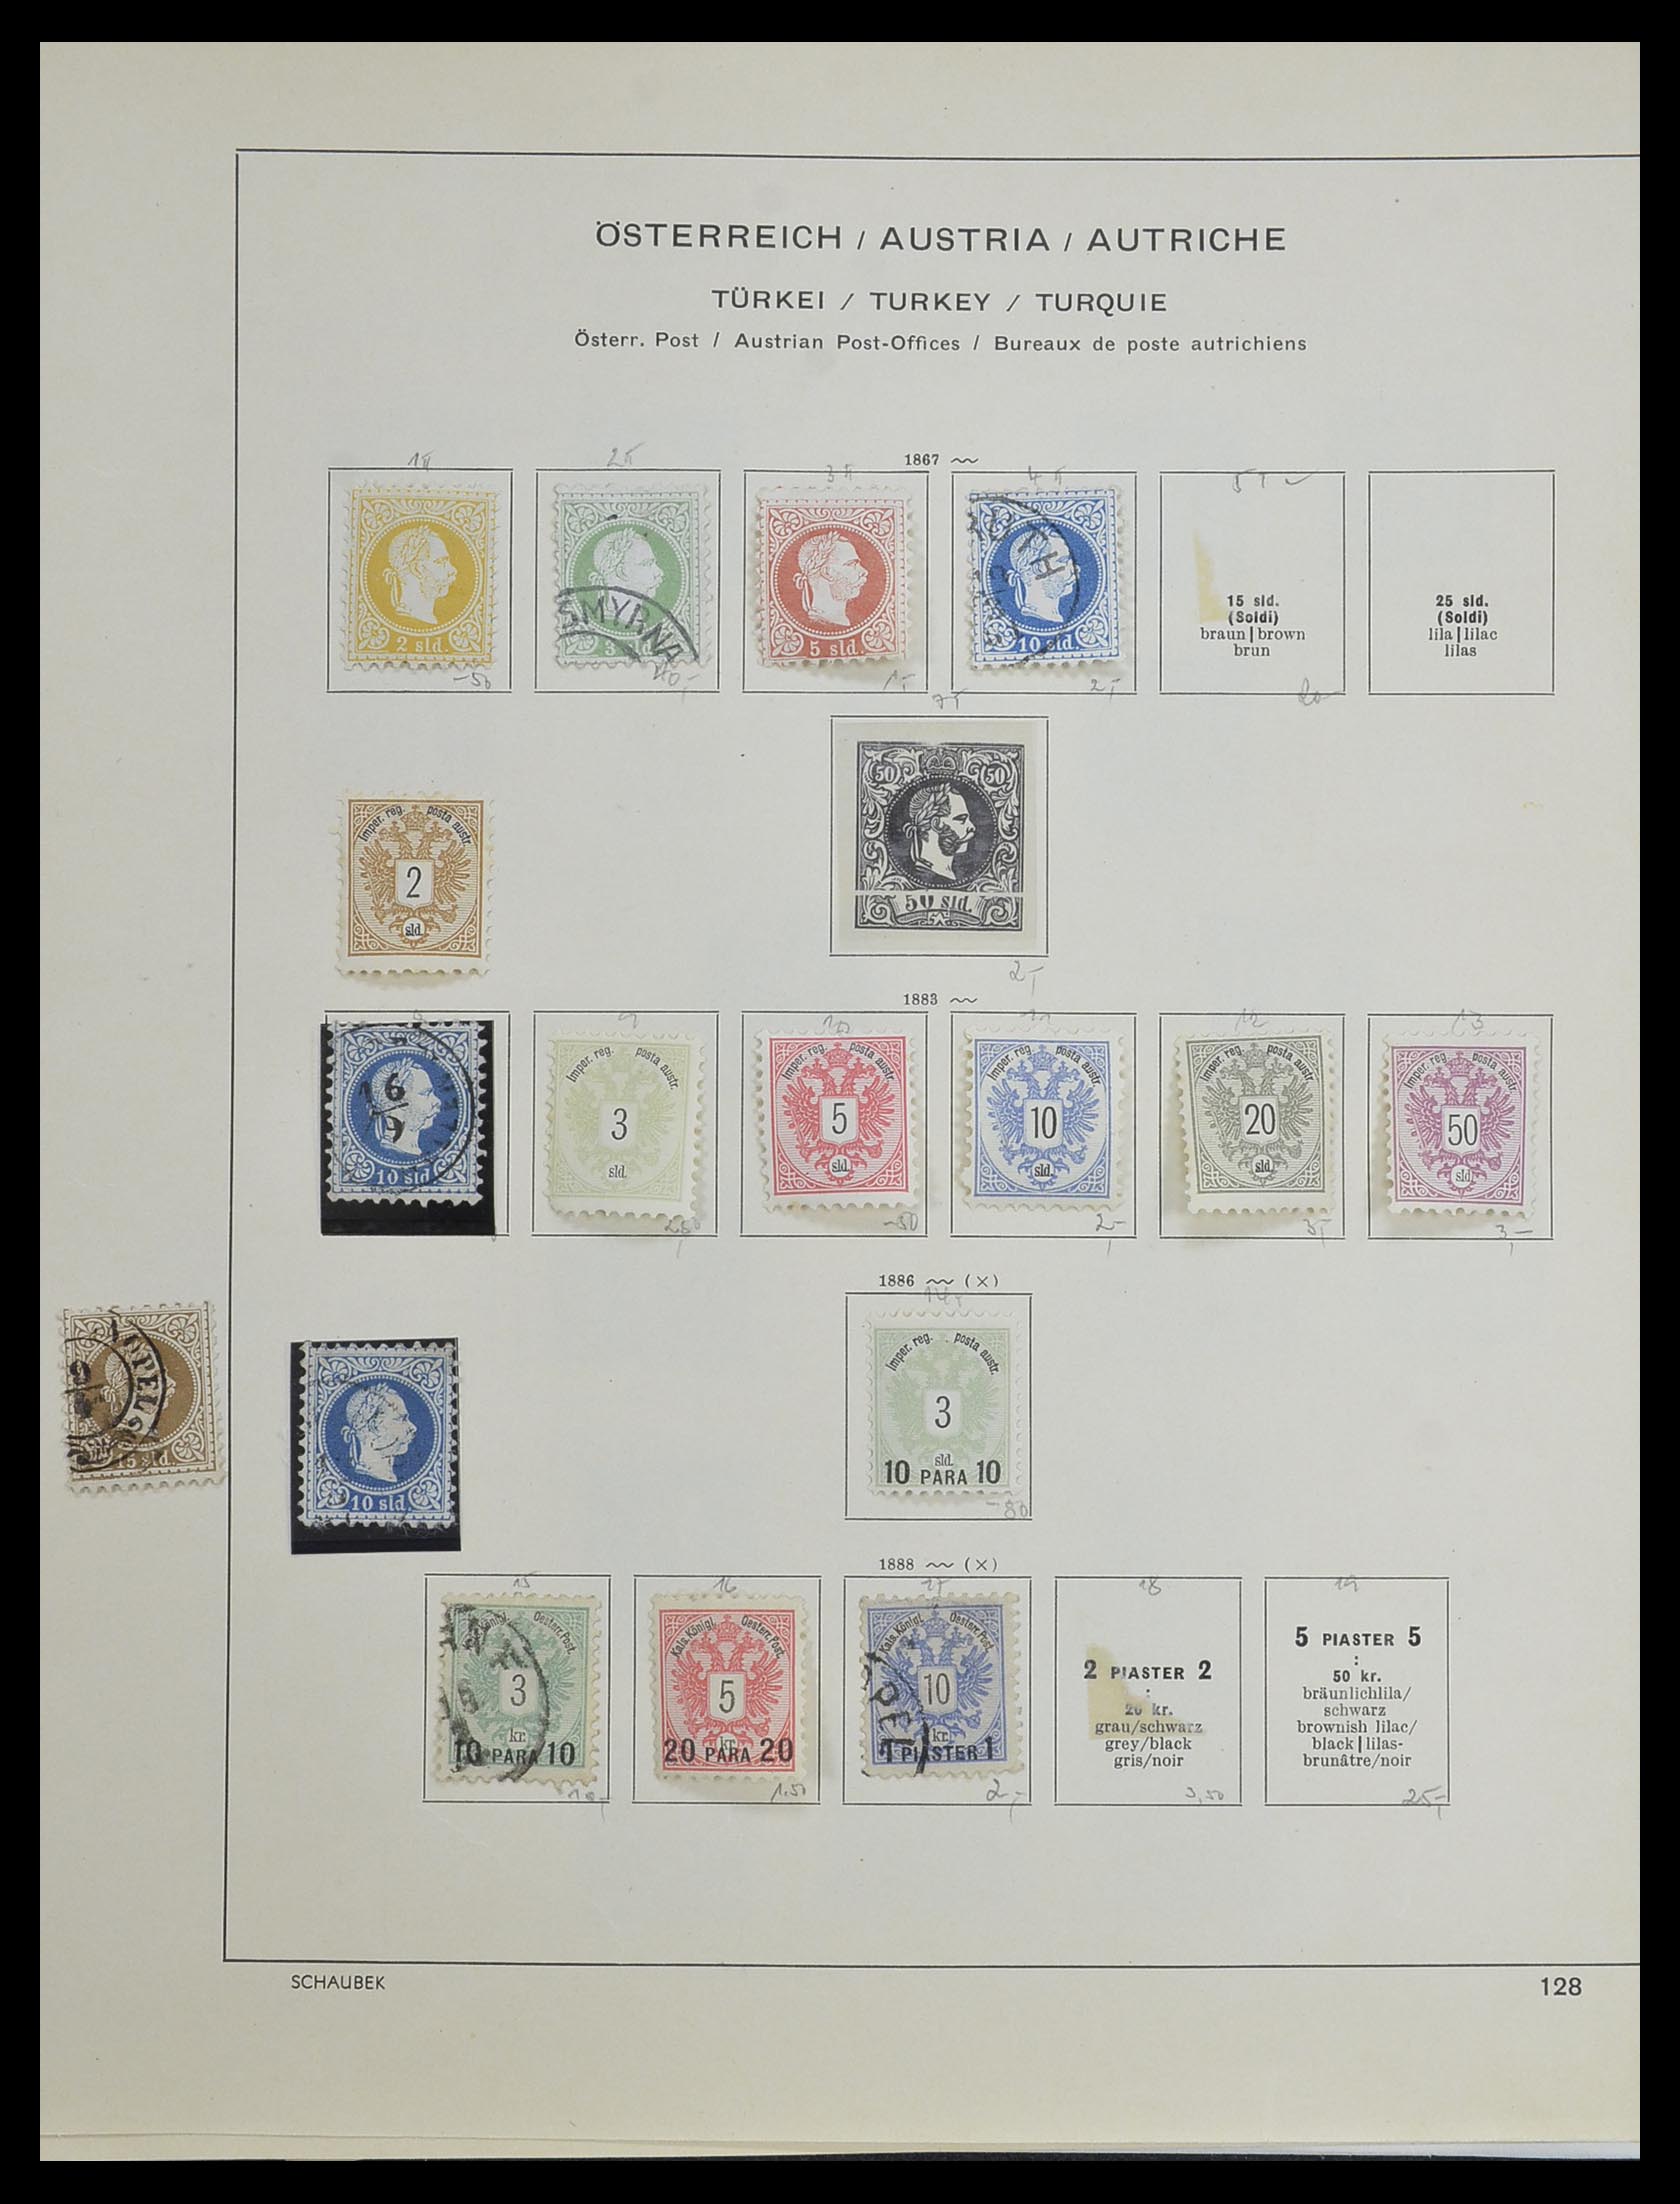 33594 022 - Stamp collection 33594 Austria and territories 1850-1918.